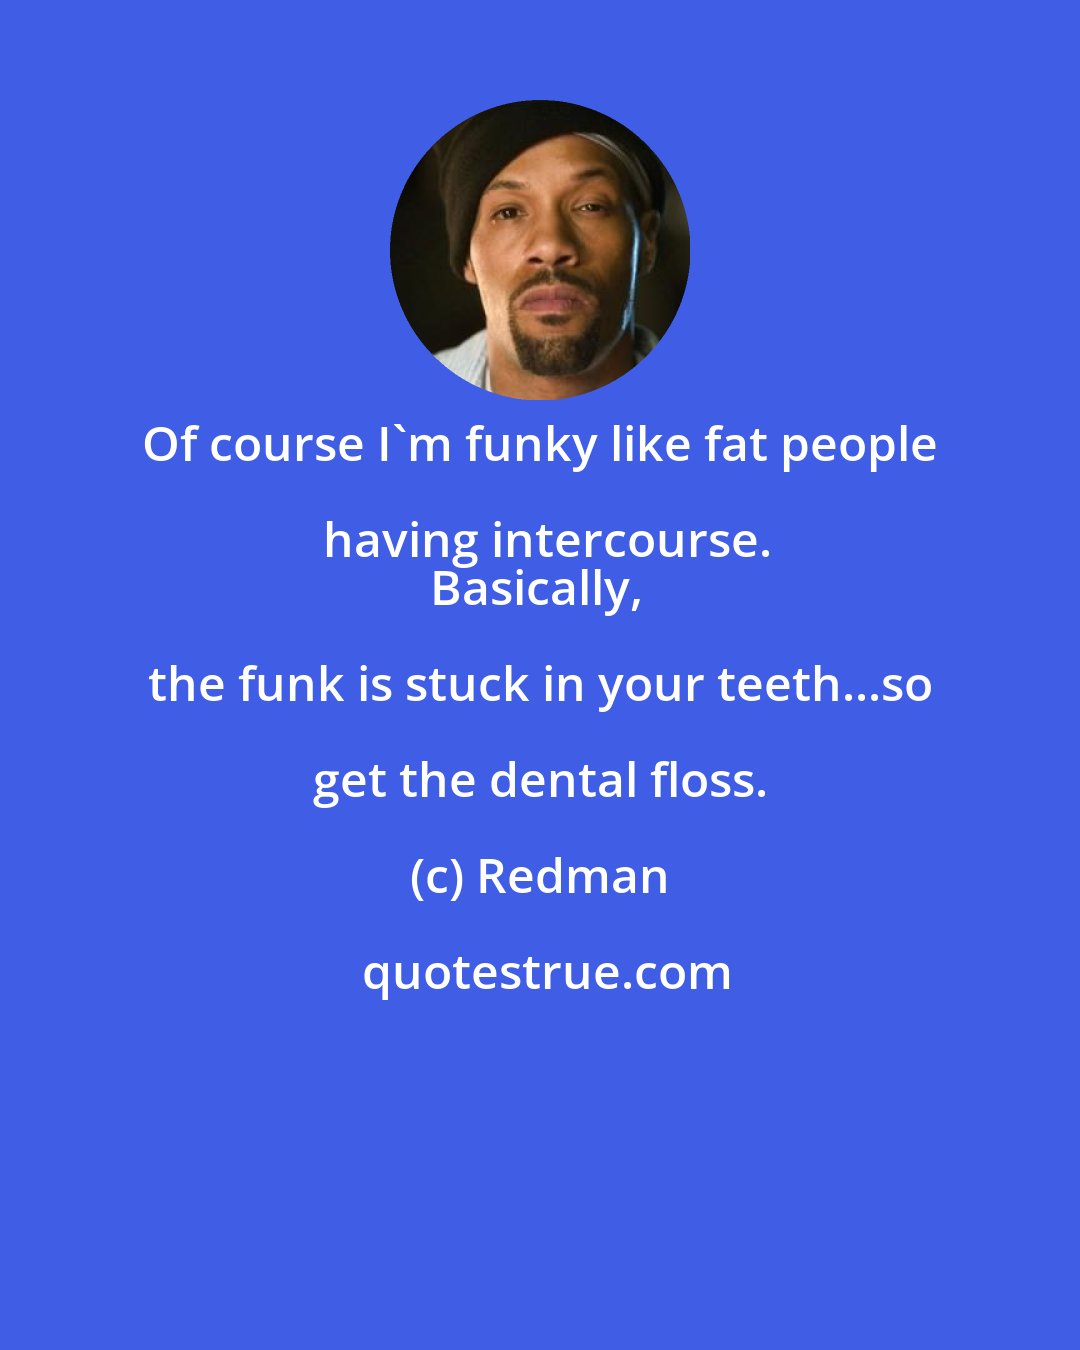 Redman: Of course I'm funky like fat people having intercourse.
Basically, the funk is stuck in your teeth...so get the dental floss.